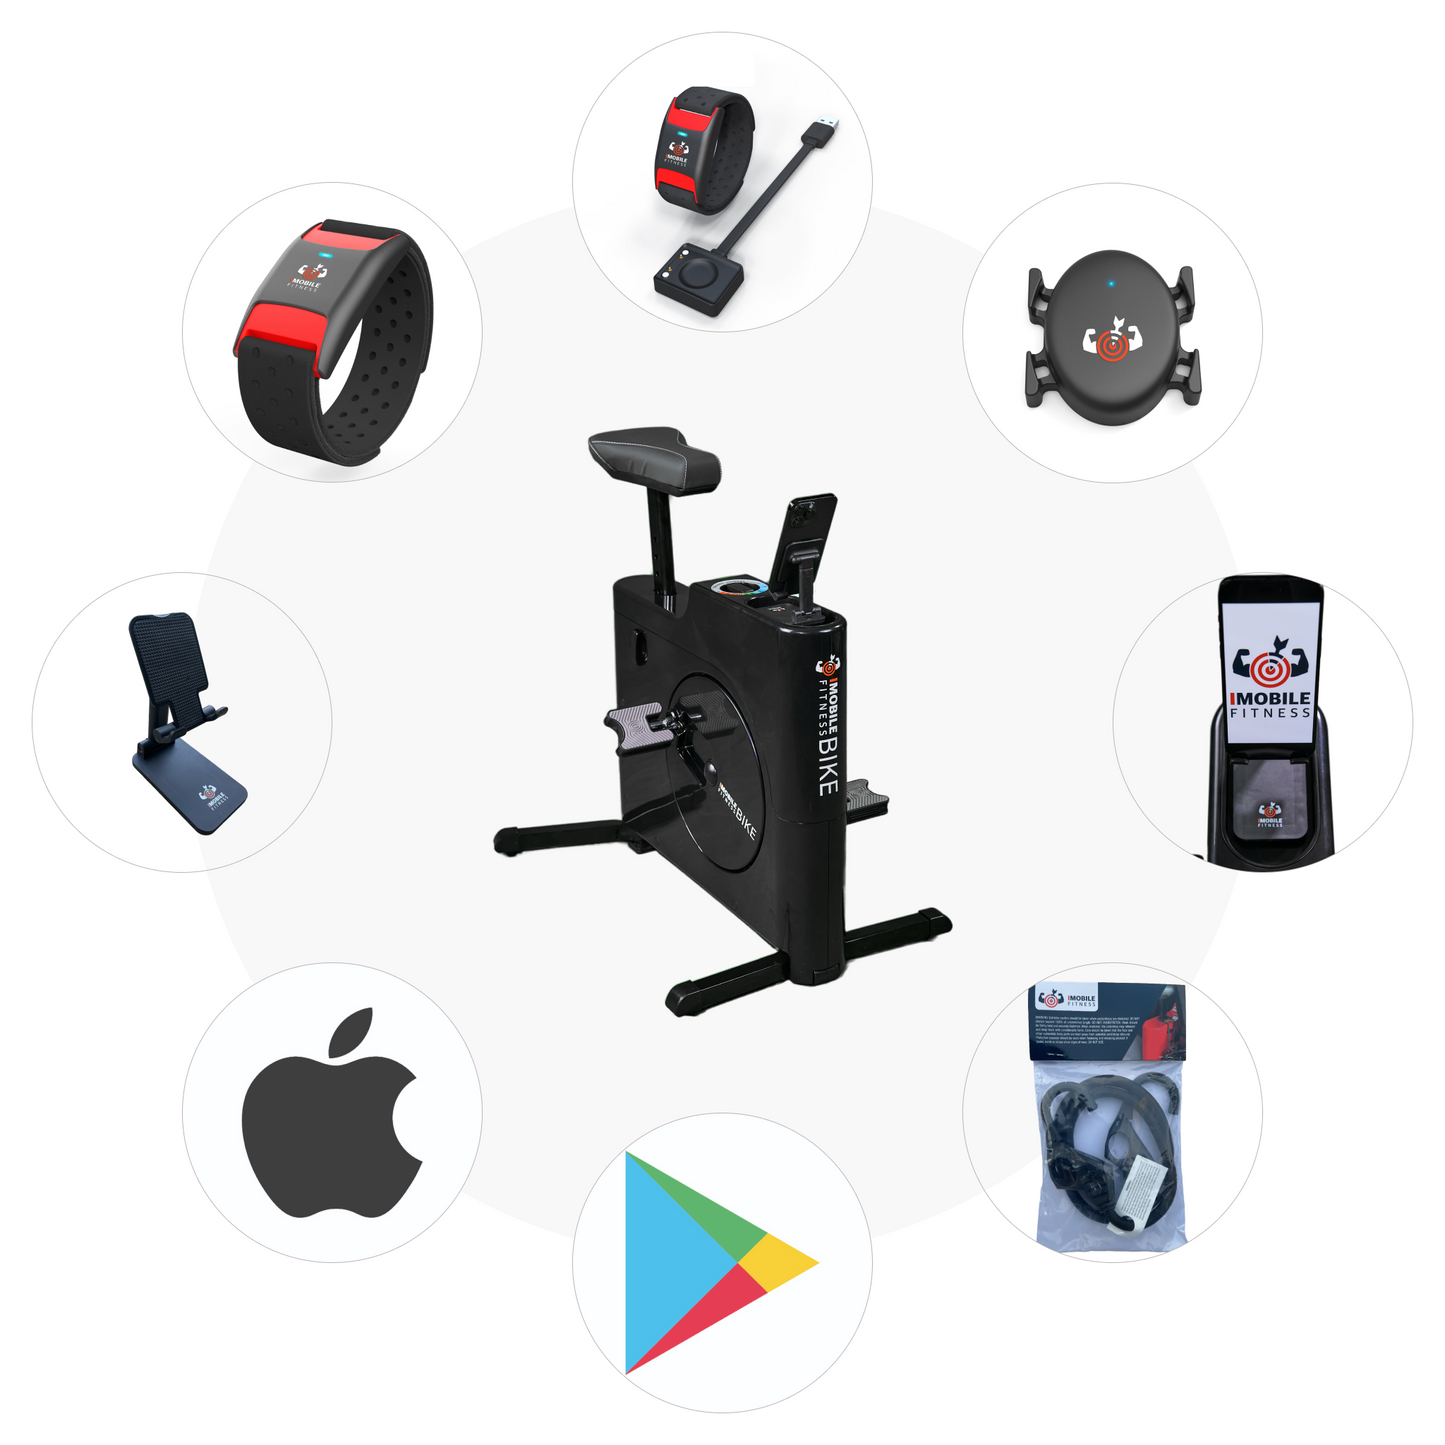 IMF — Fitness Bike+Included accessories